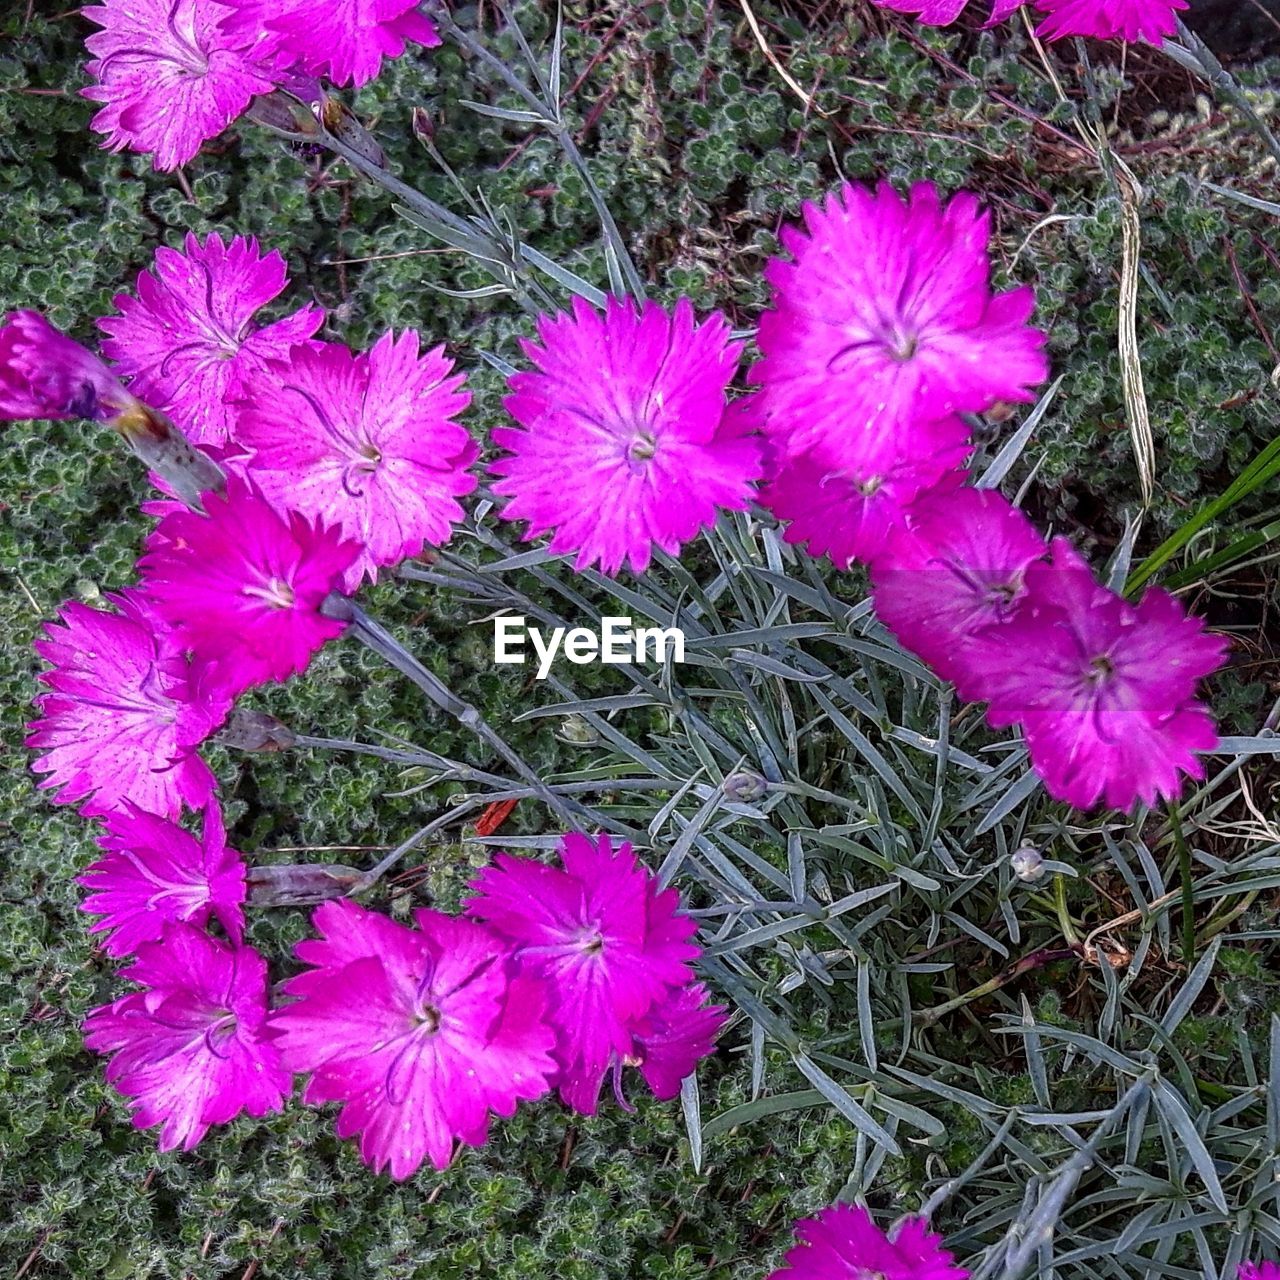 HIGH ANGLE VIEW OF PINK FLOWERS ON PLANT